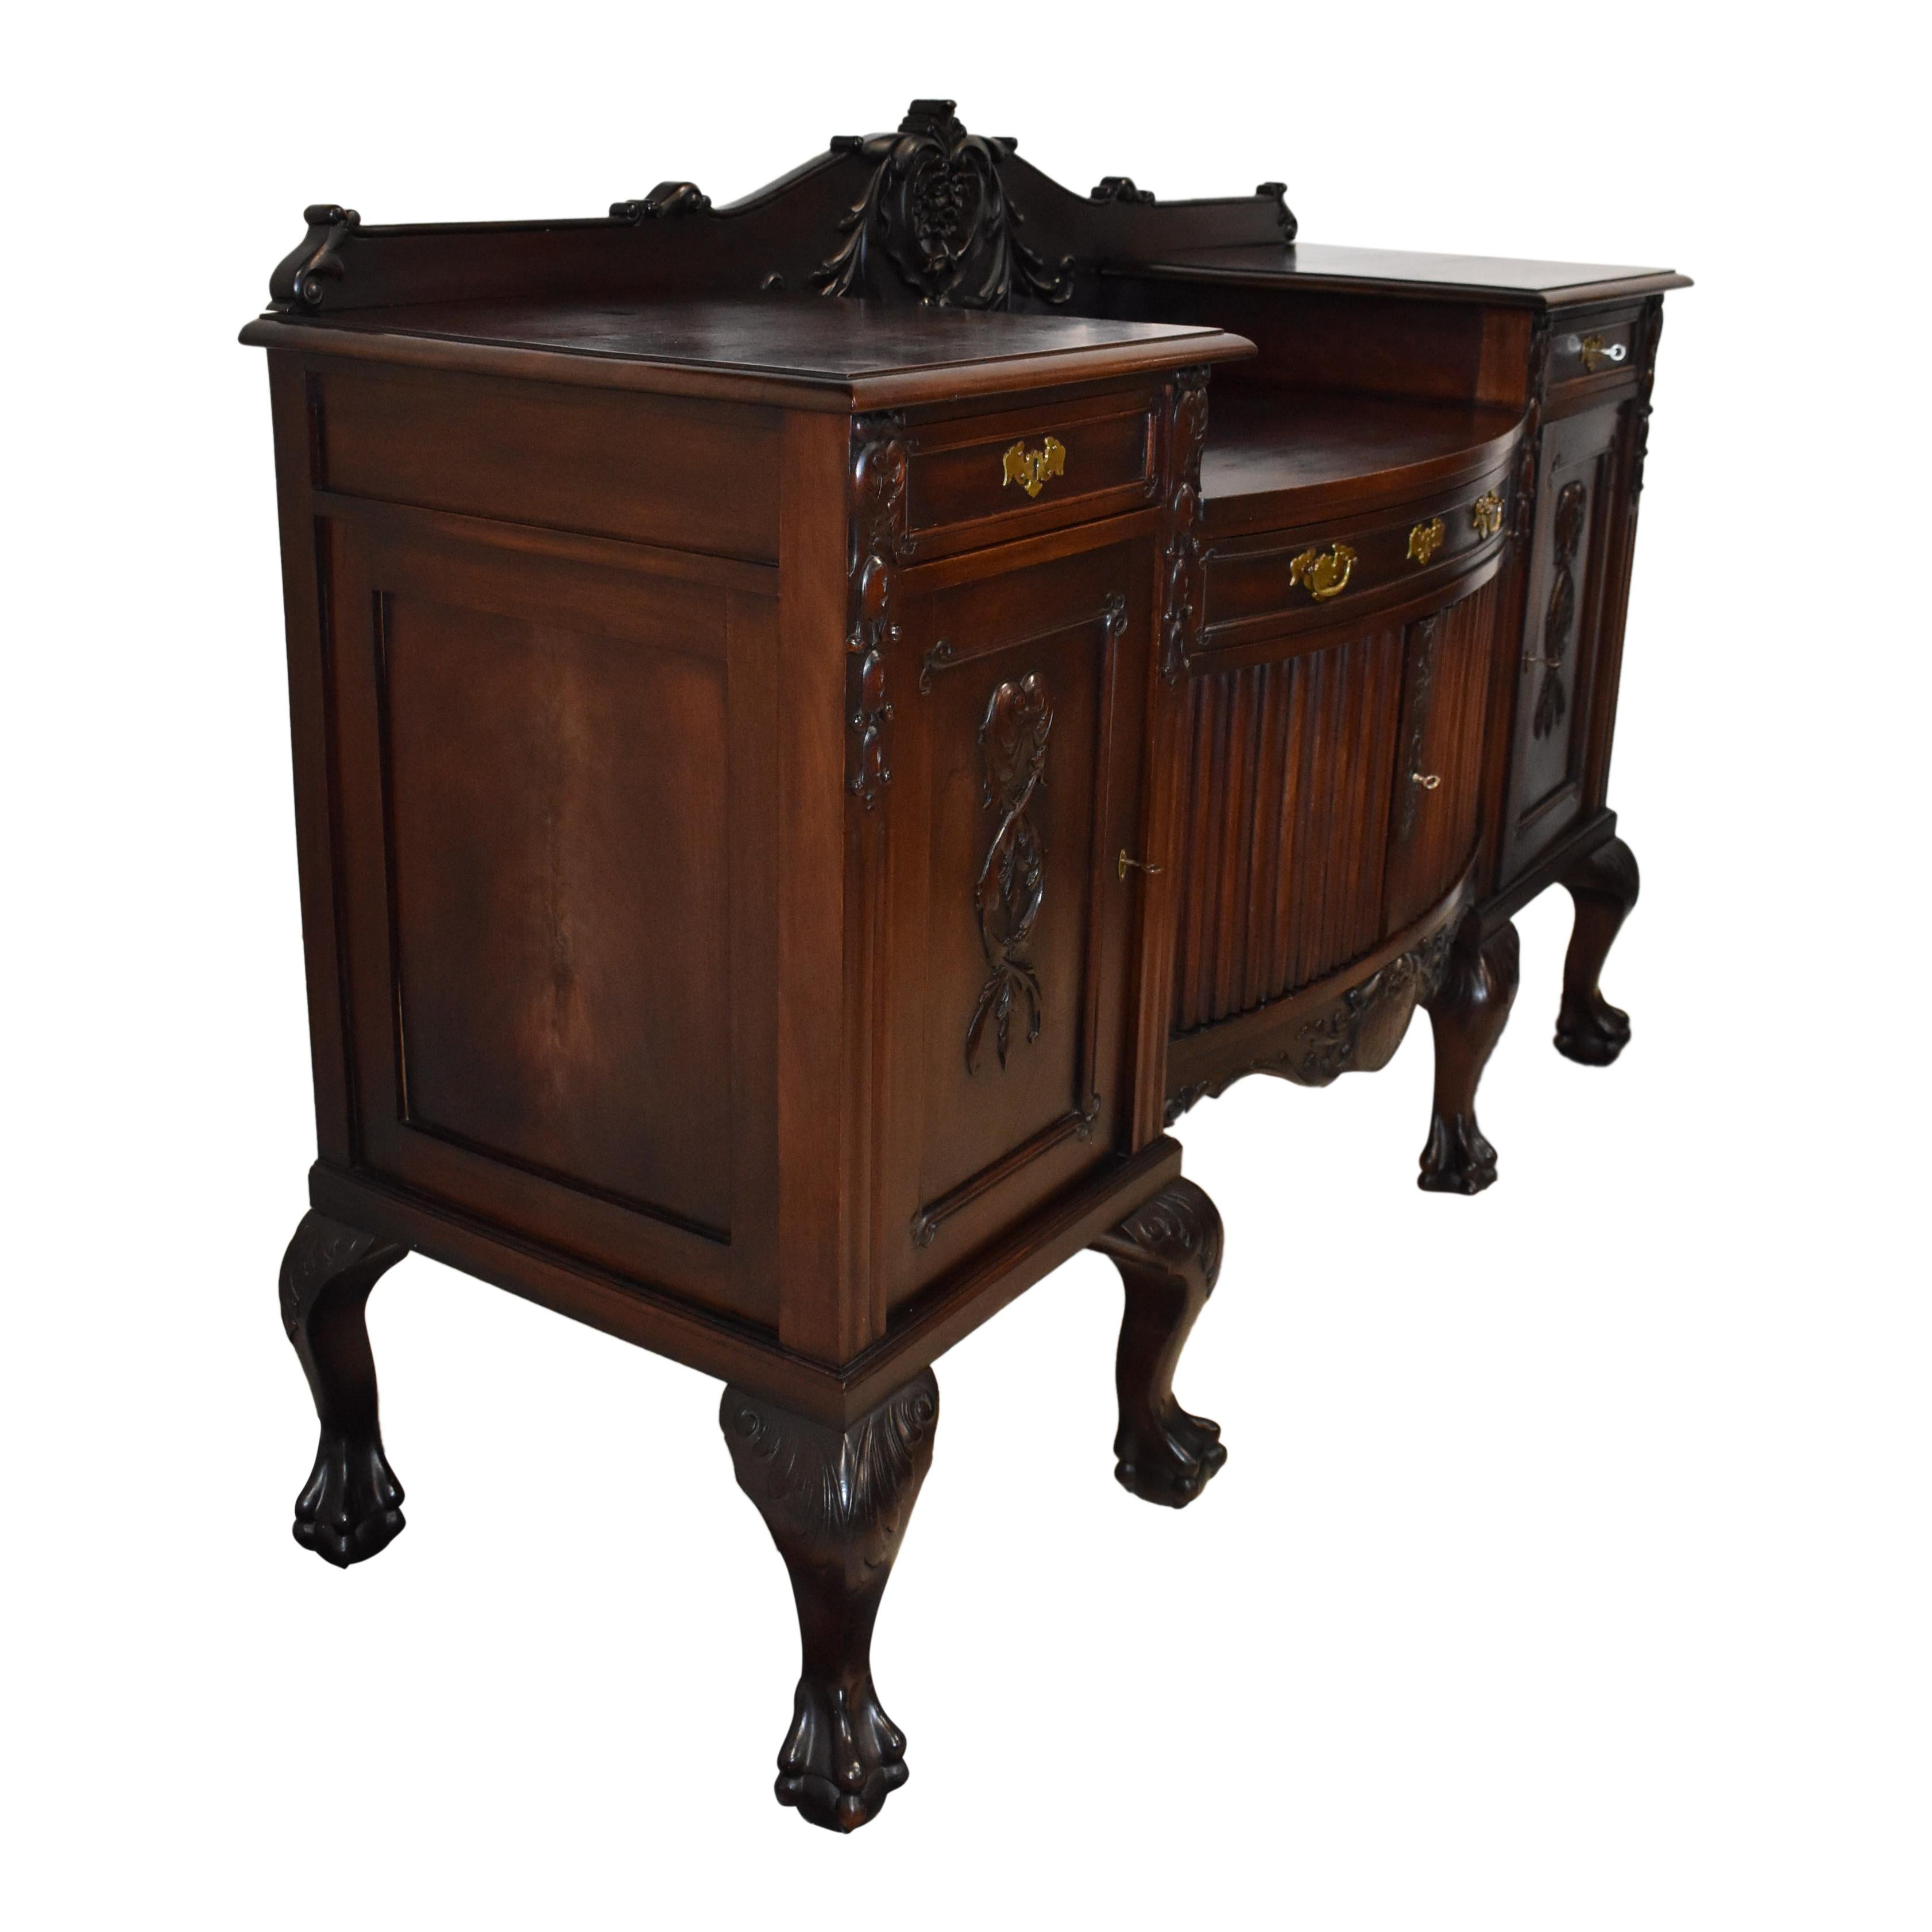 This magnificent mahogany sideboard features a drop-center with a drawer over bowed and fluted center doors flanked by side doors with carved pendant shells amid descending scrolled vines. The side doors have drawers above them, and the doors open